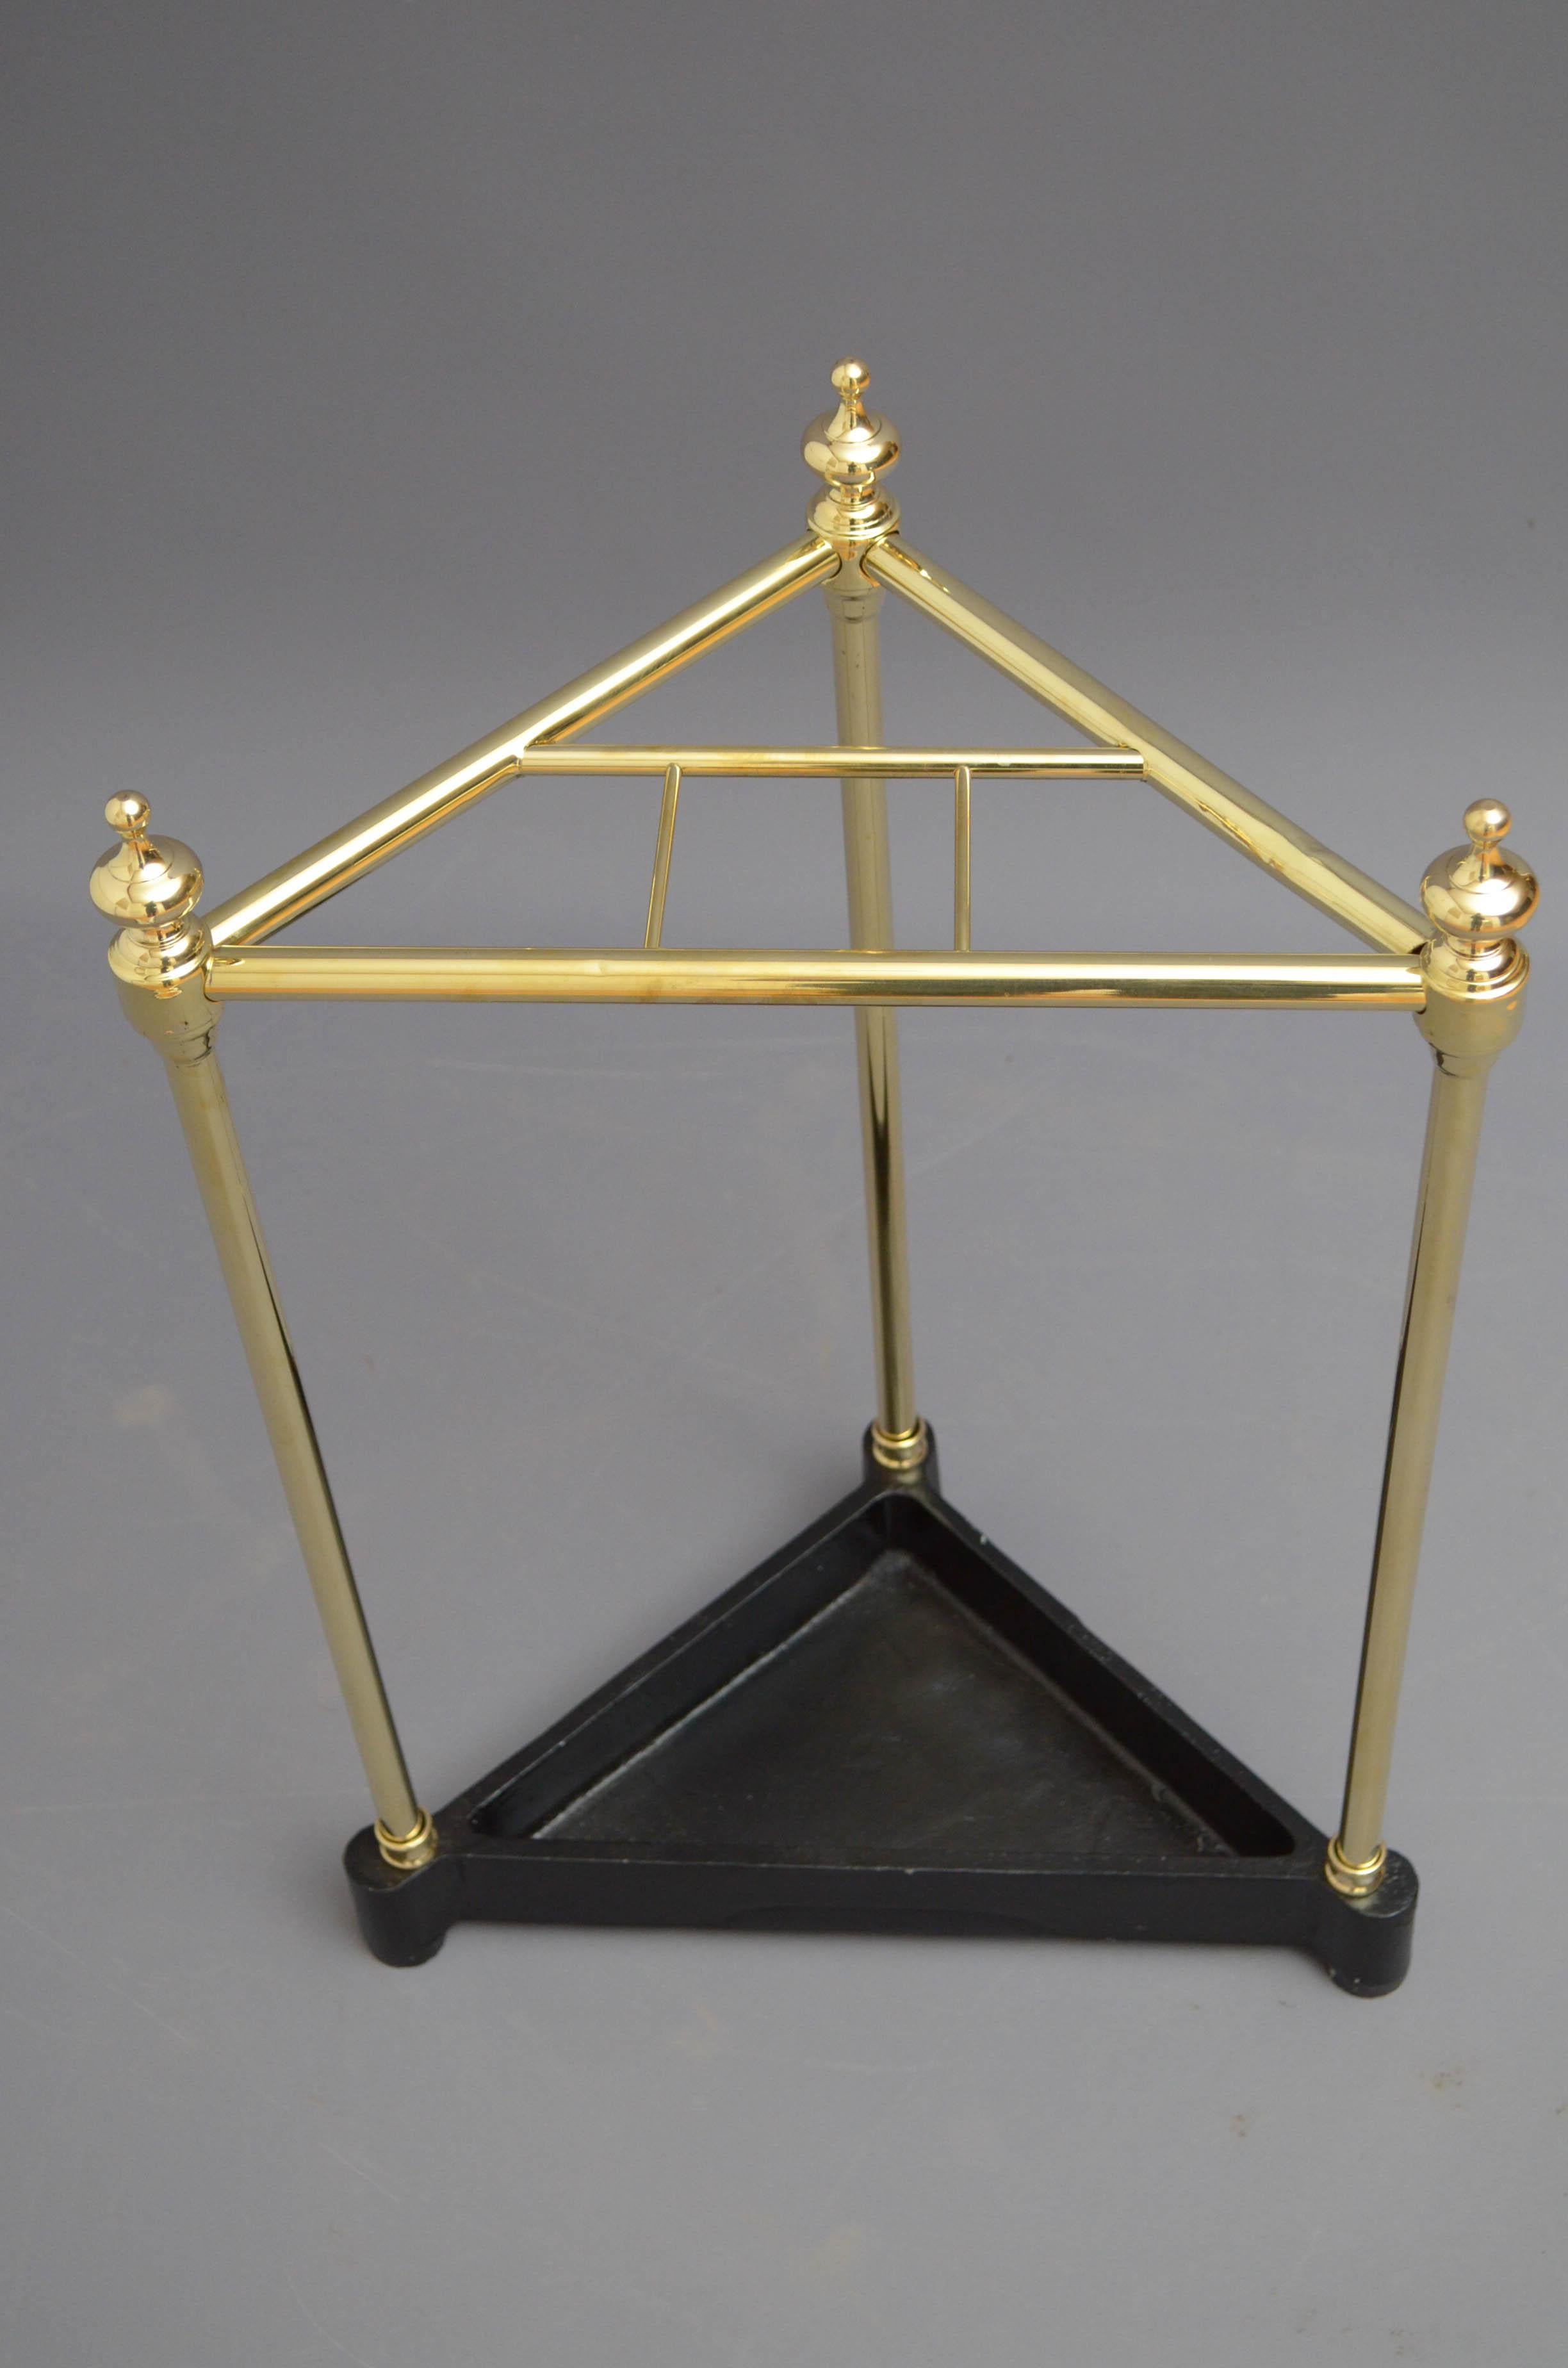 Unusual corner umbrella stand in brass with decorative finials, four umbrella or walking sticks compartments and black drip tray. This stand has been cleaned and polished and is in home ready condition. c1970
Measures: H23.5